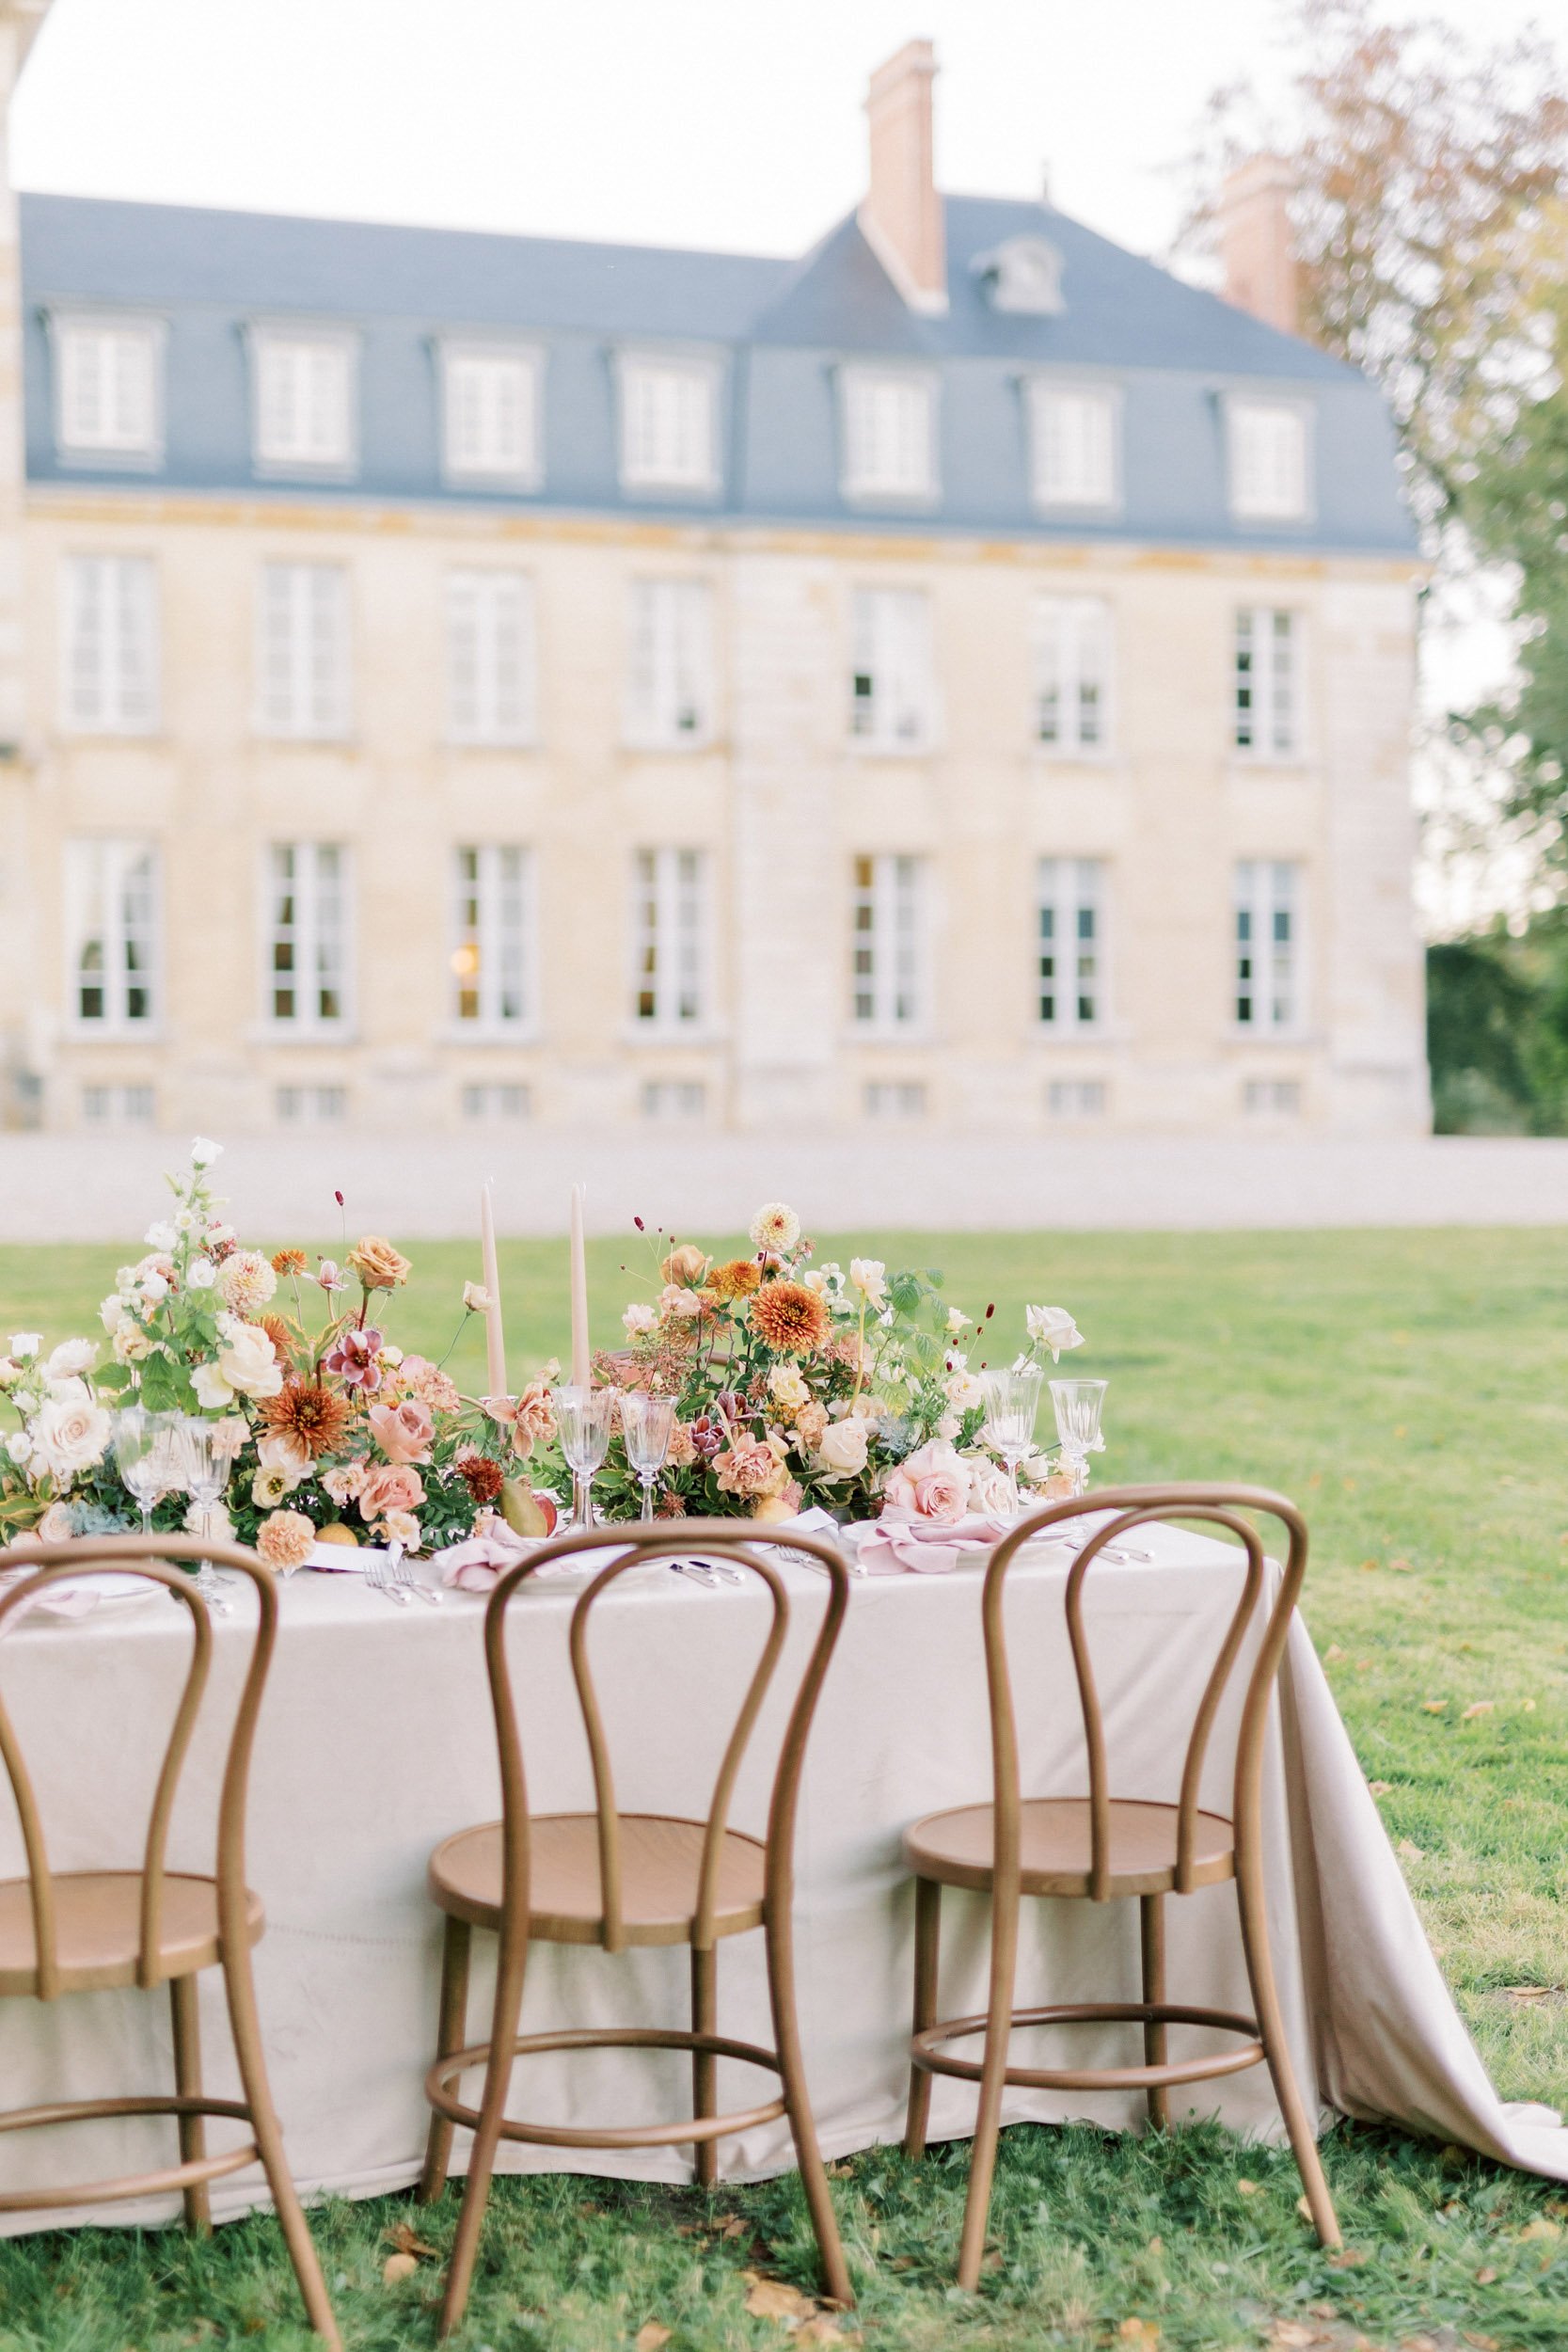 A table set up in front of a large French chateau.